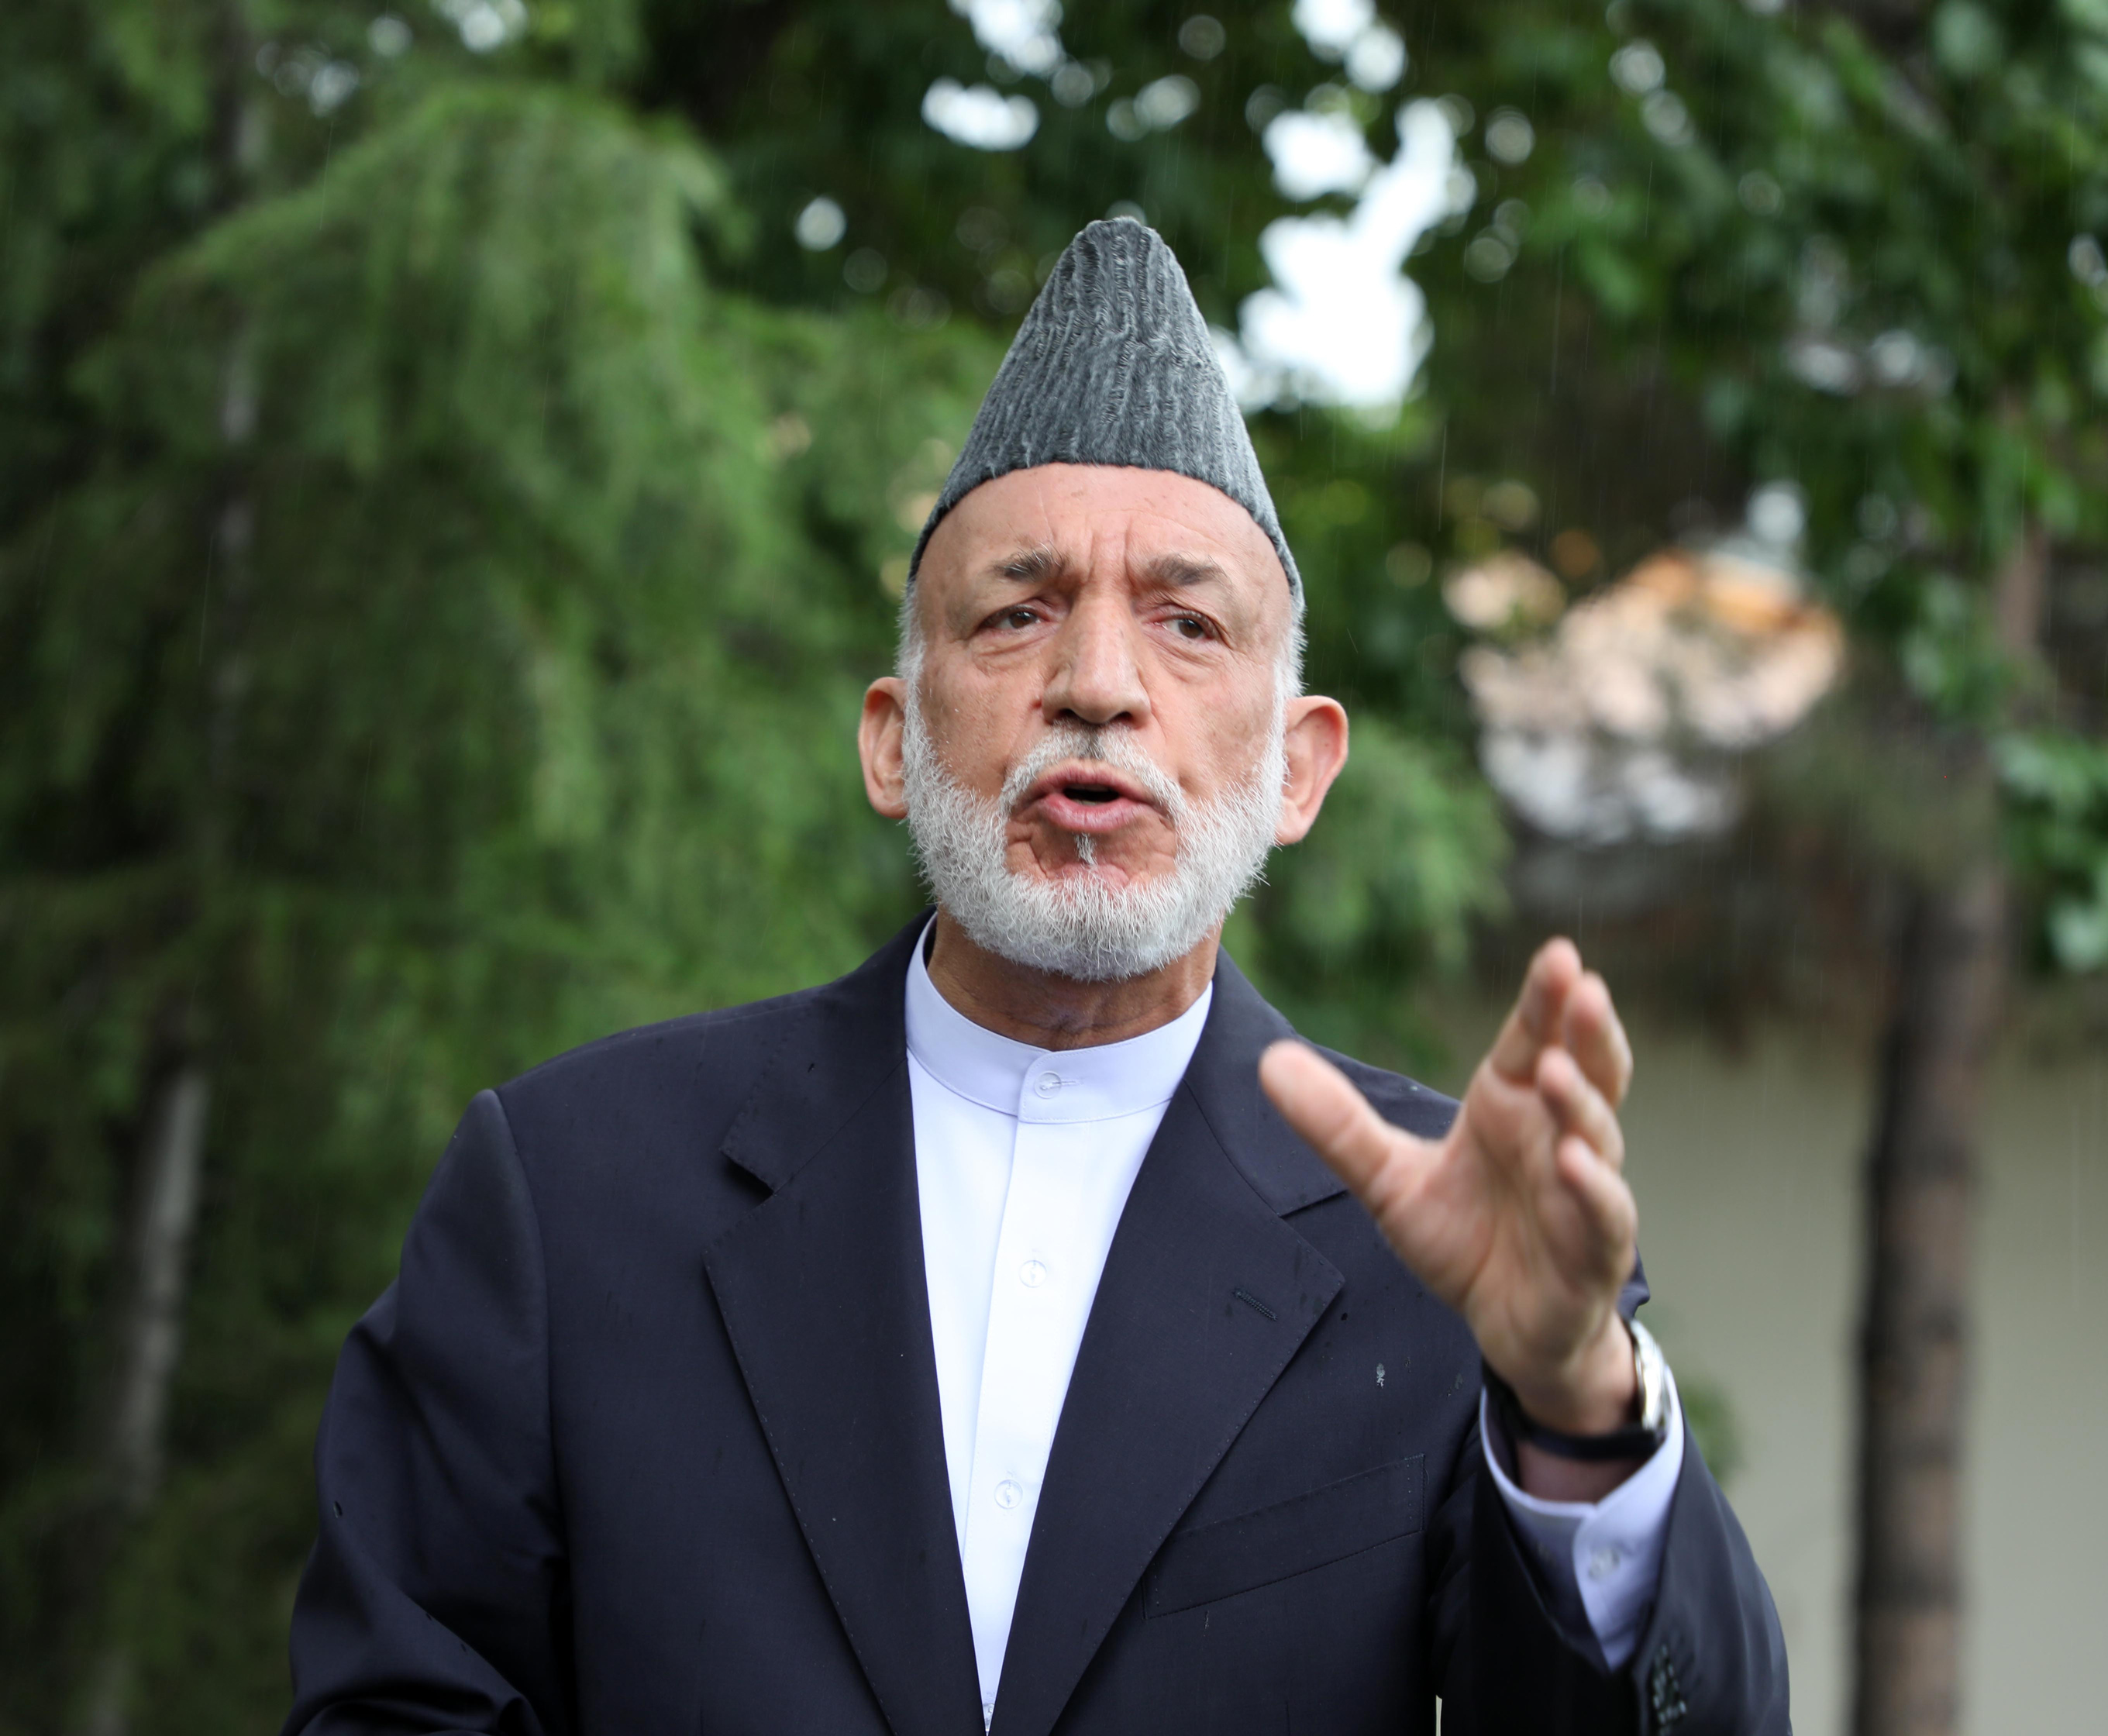 Former President of Afghanistan Hamid Karzai speaks during a press conference in Kabul, on July 13.